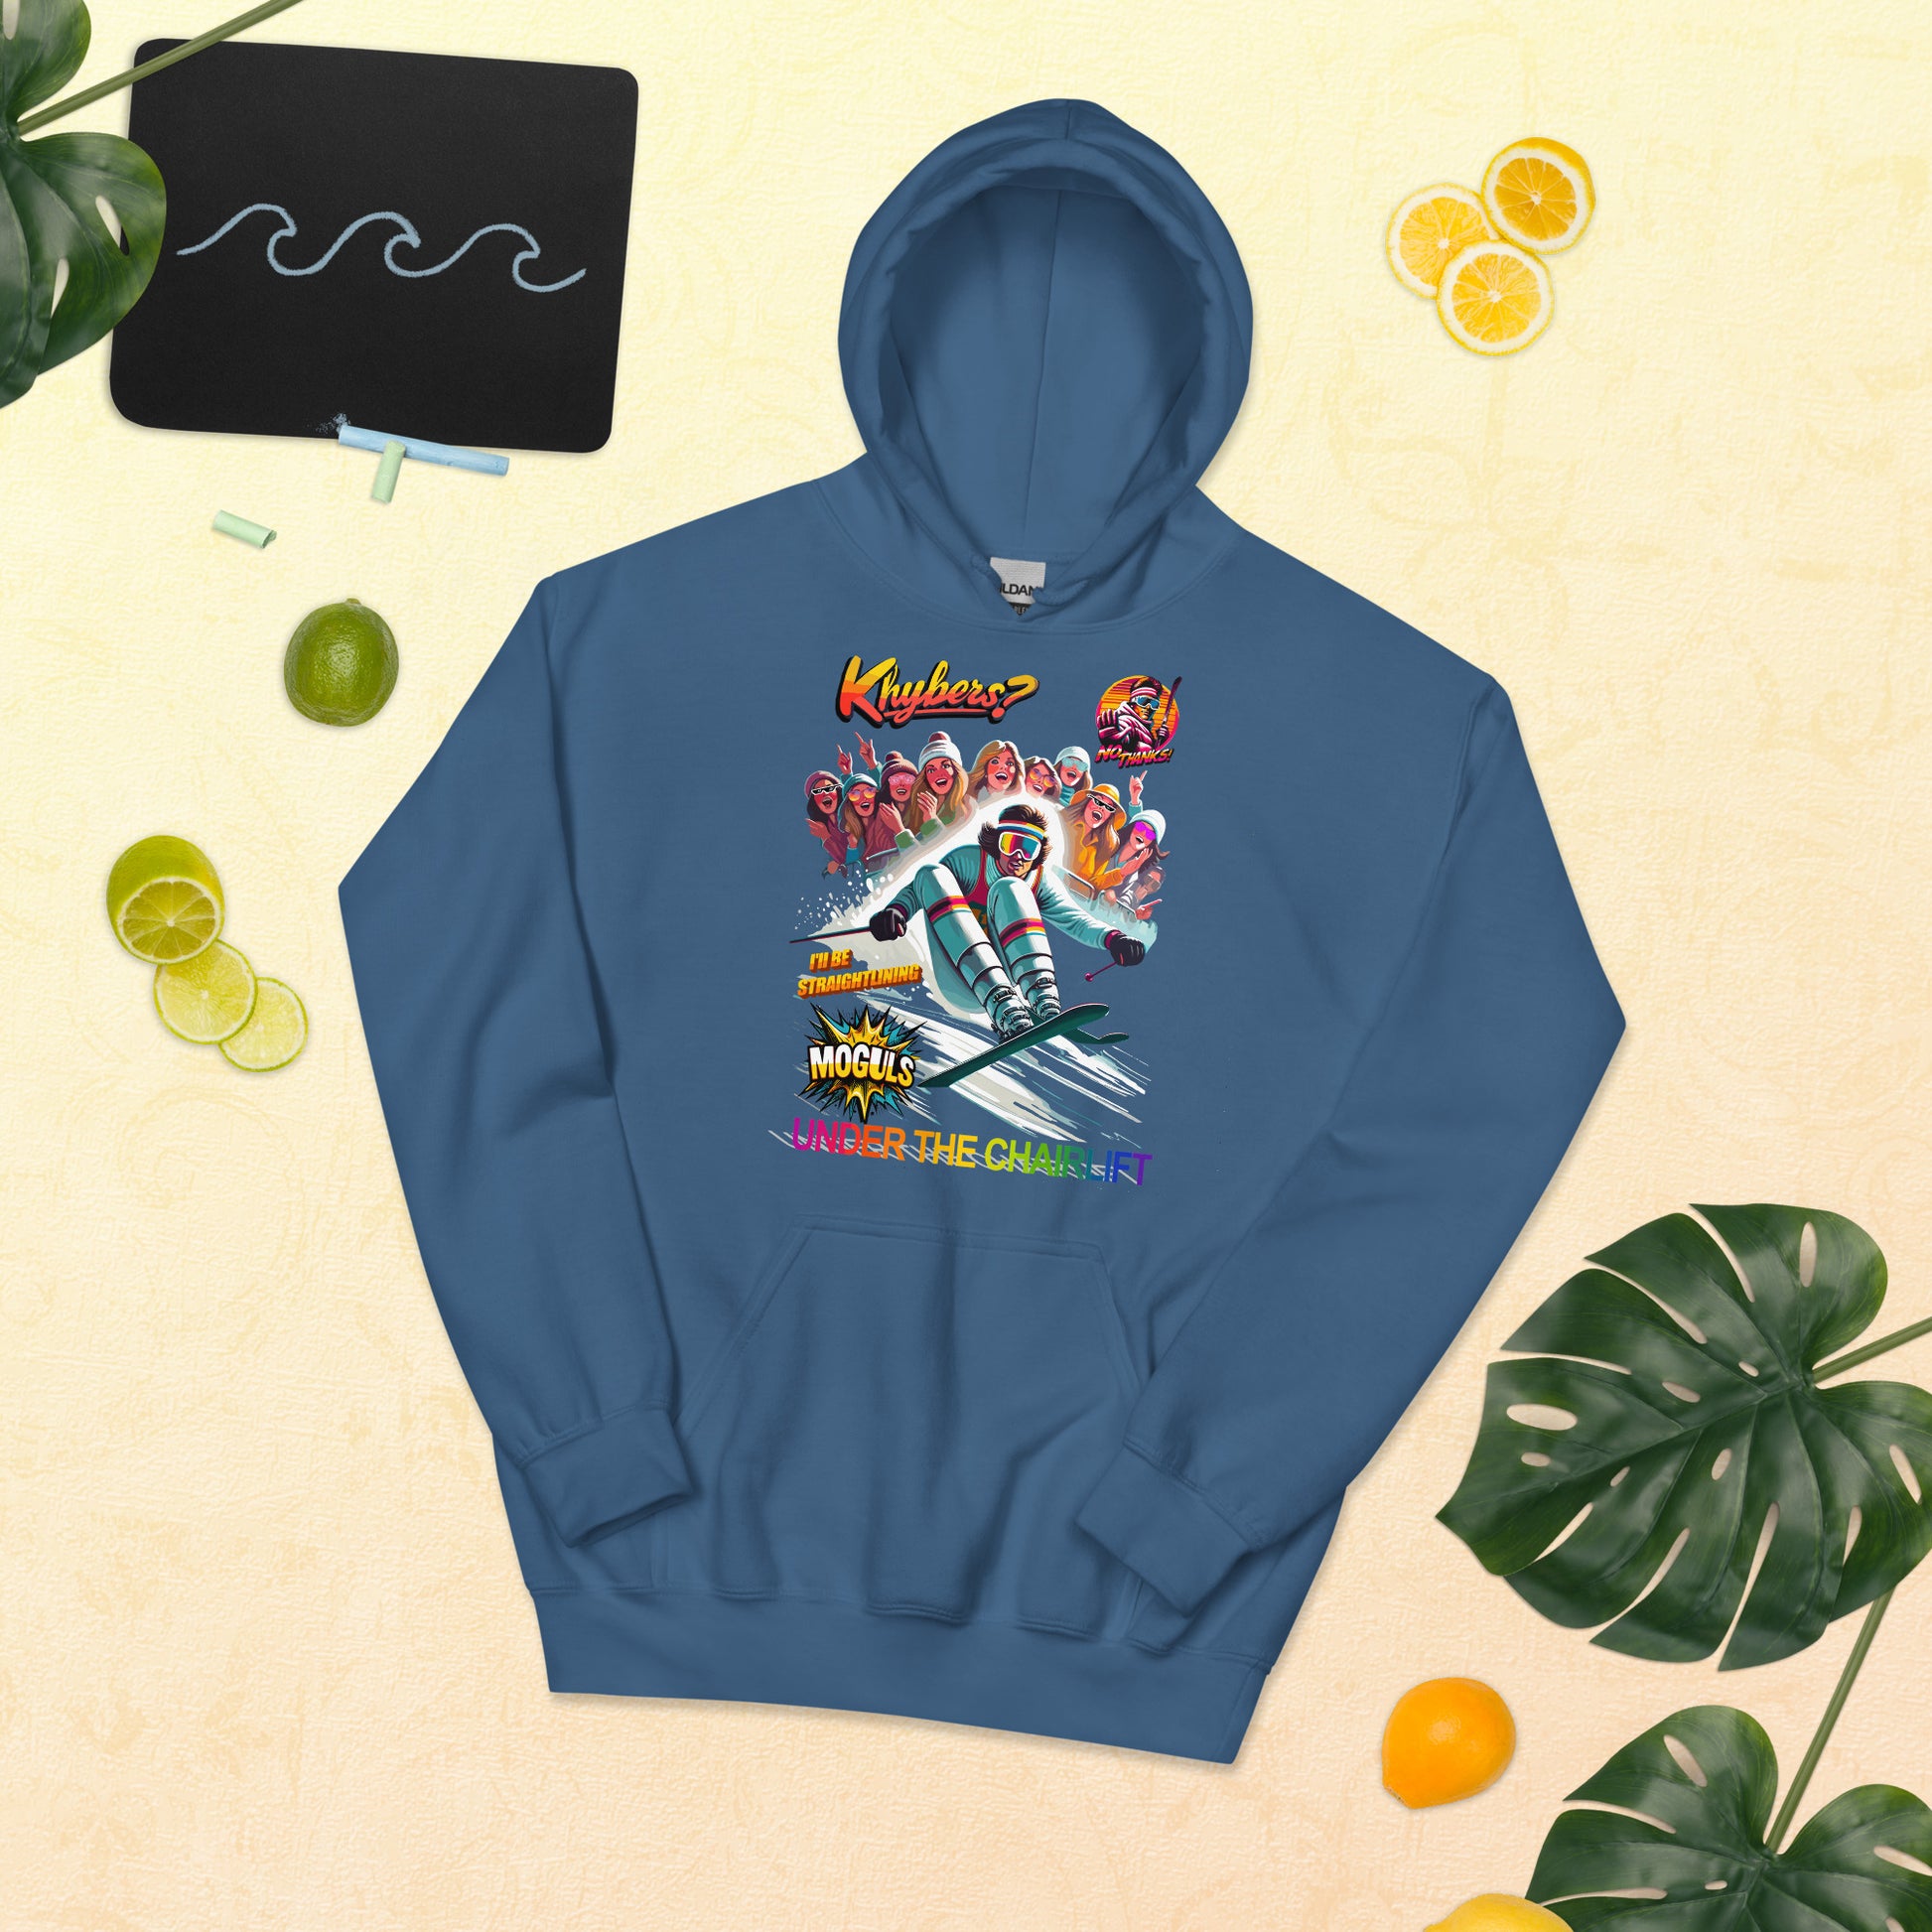 Khybers? No Thanks Ill be Straight Lining Moguls Under the Chairlift Hoodie printed by Whistler Shirts